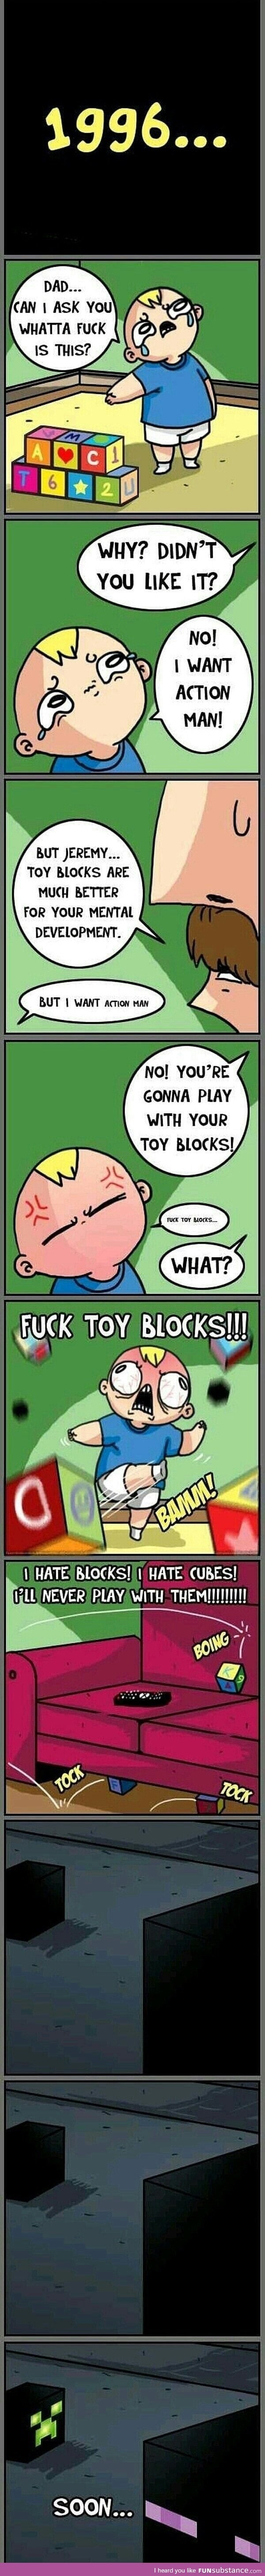 Play with your damn blocks